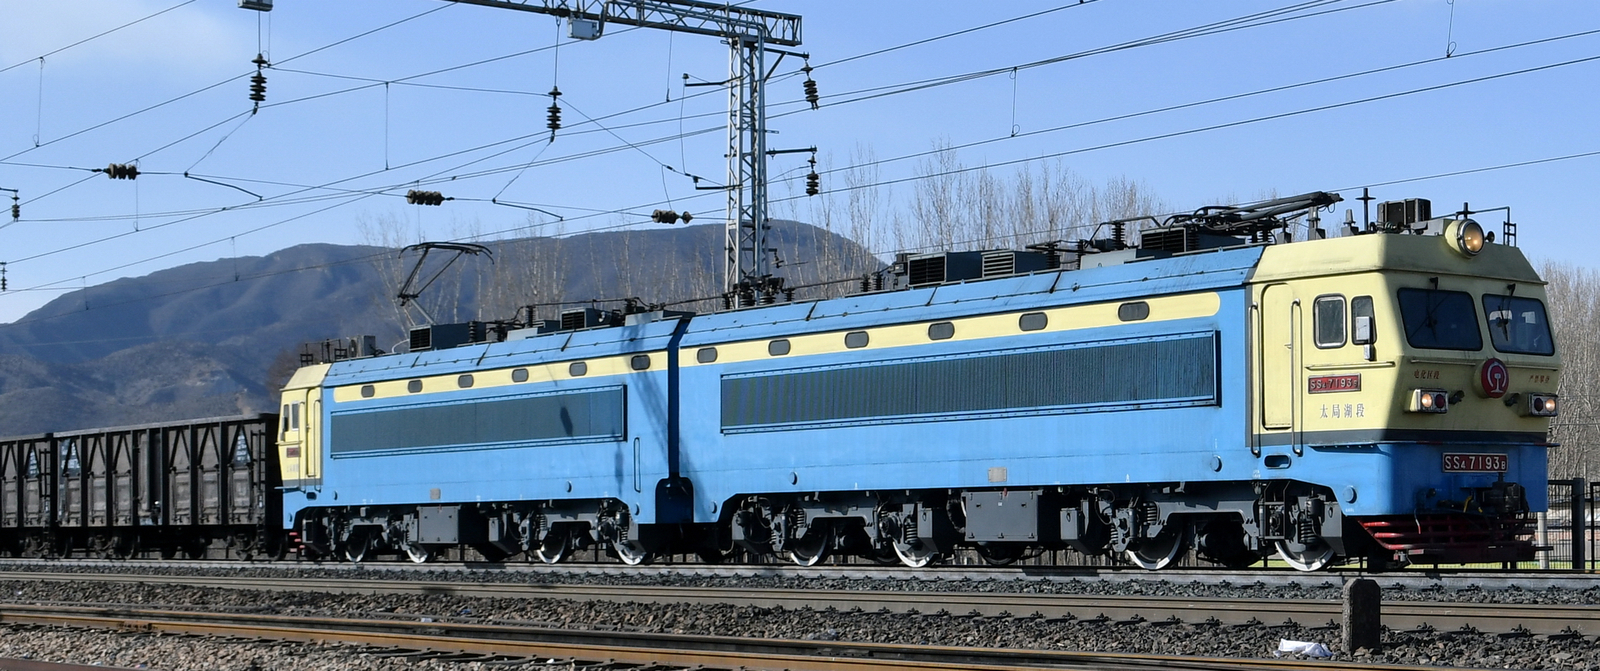 SS4-7193 in February 2018 with a coal train on the Daqin Line in Cha Wu